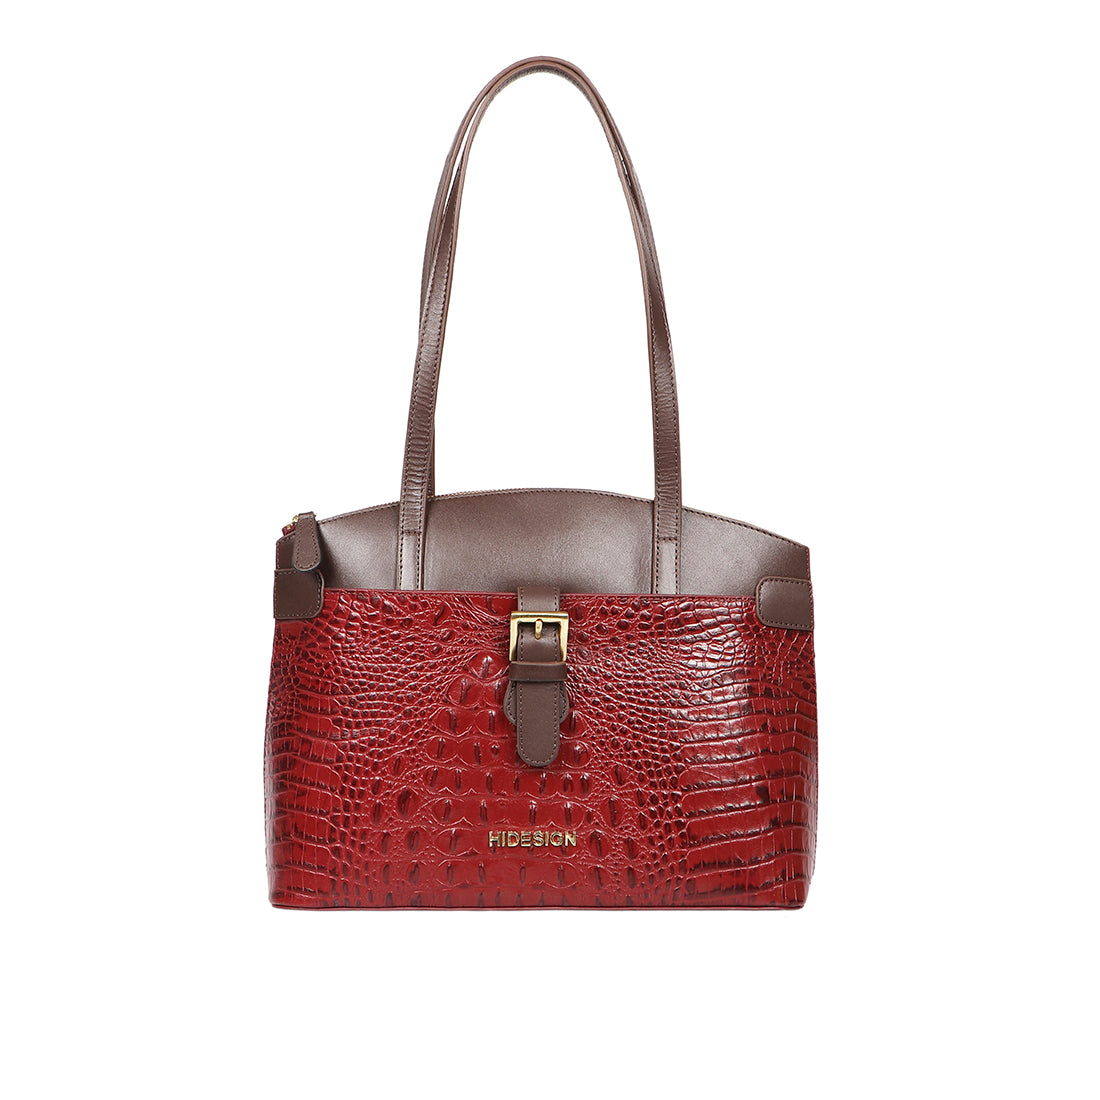 Shop Luxury Italian Leather Handbags & Tote Bags Online for Women –  M.I.L.A. made in Los Angeles